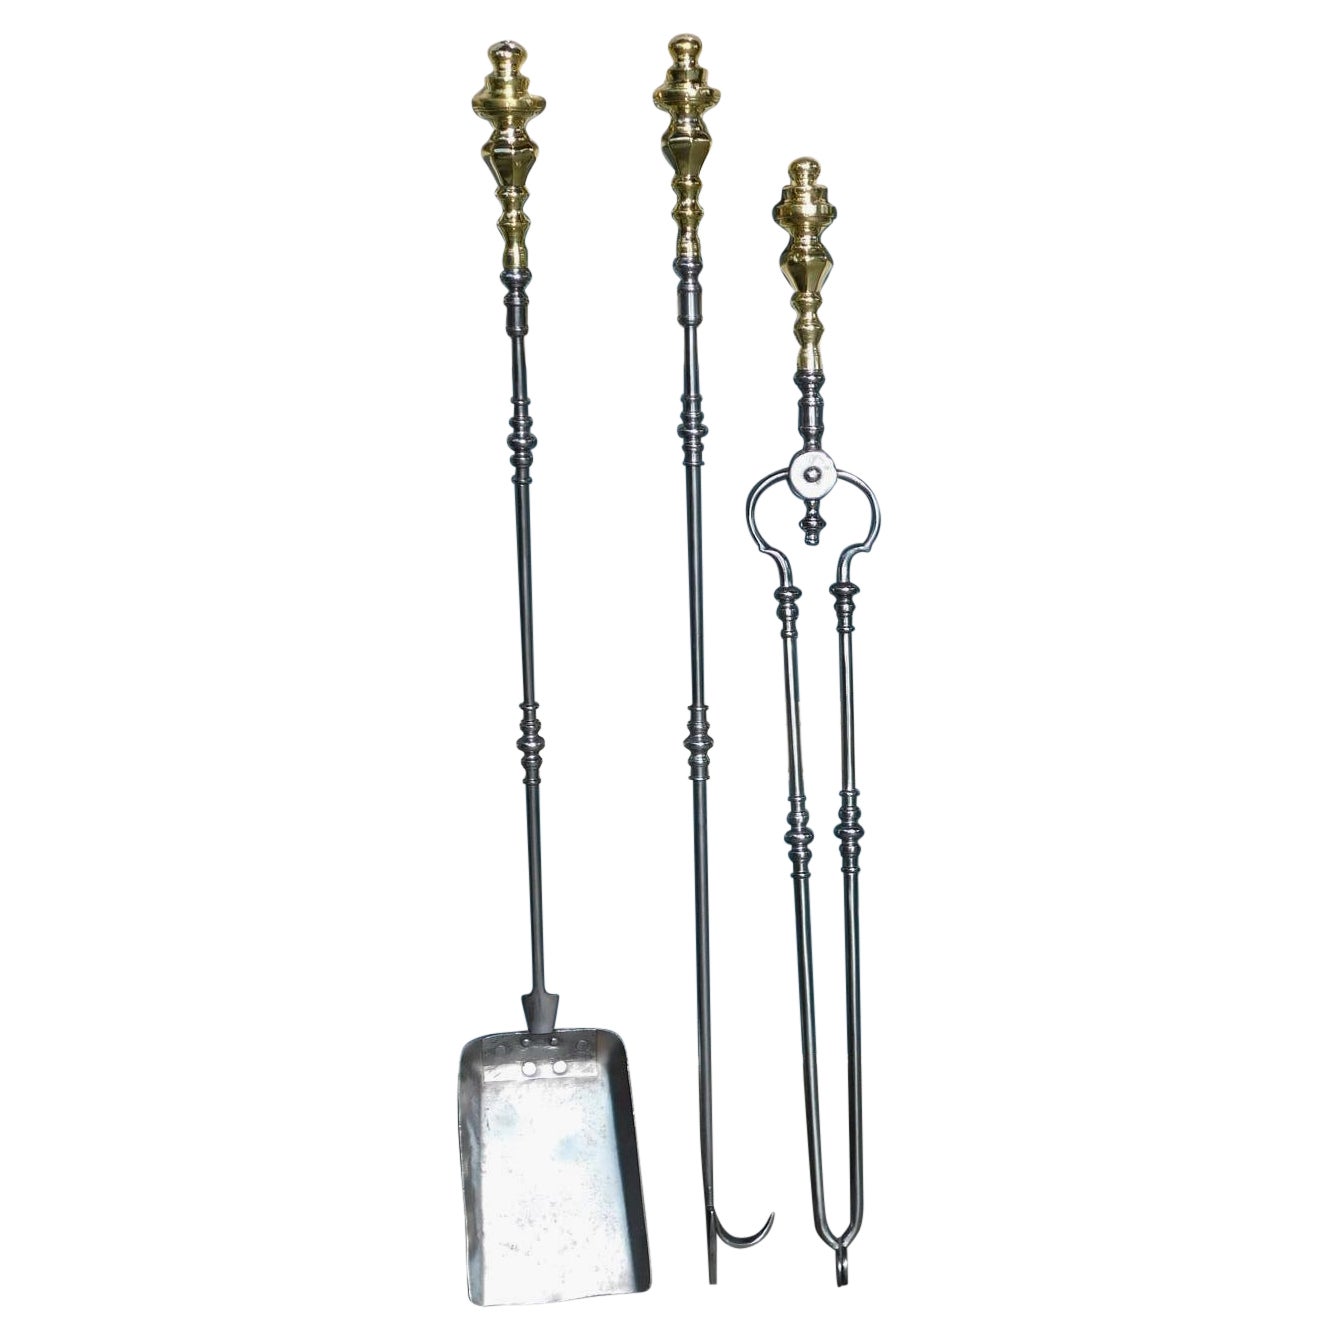 Set of American Brass Finial and Polished Steel Fire Place Tools, Phil. C. 1810